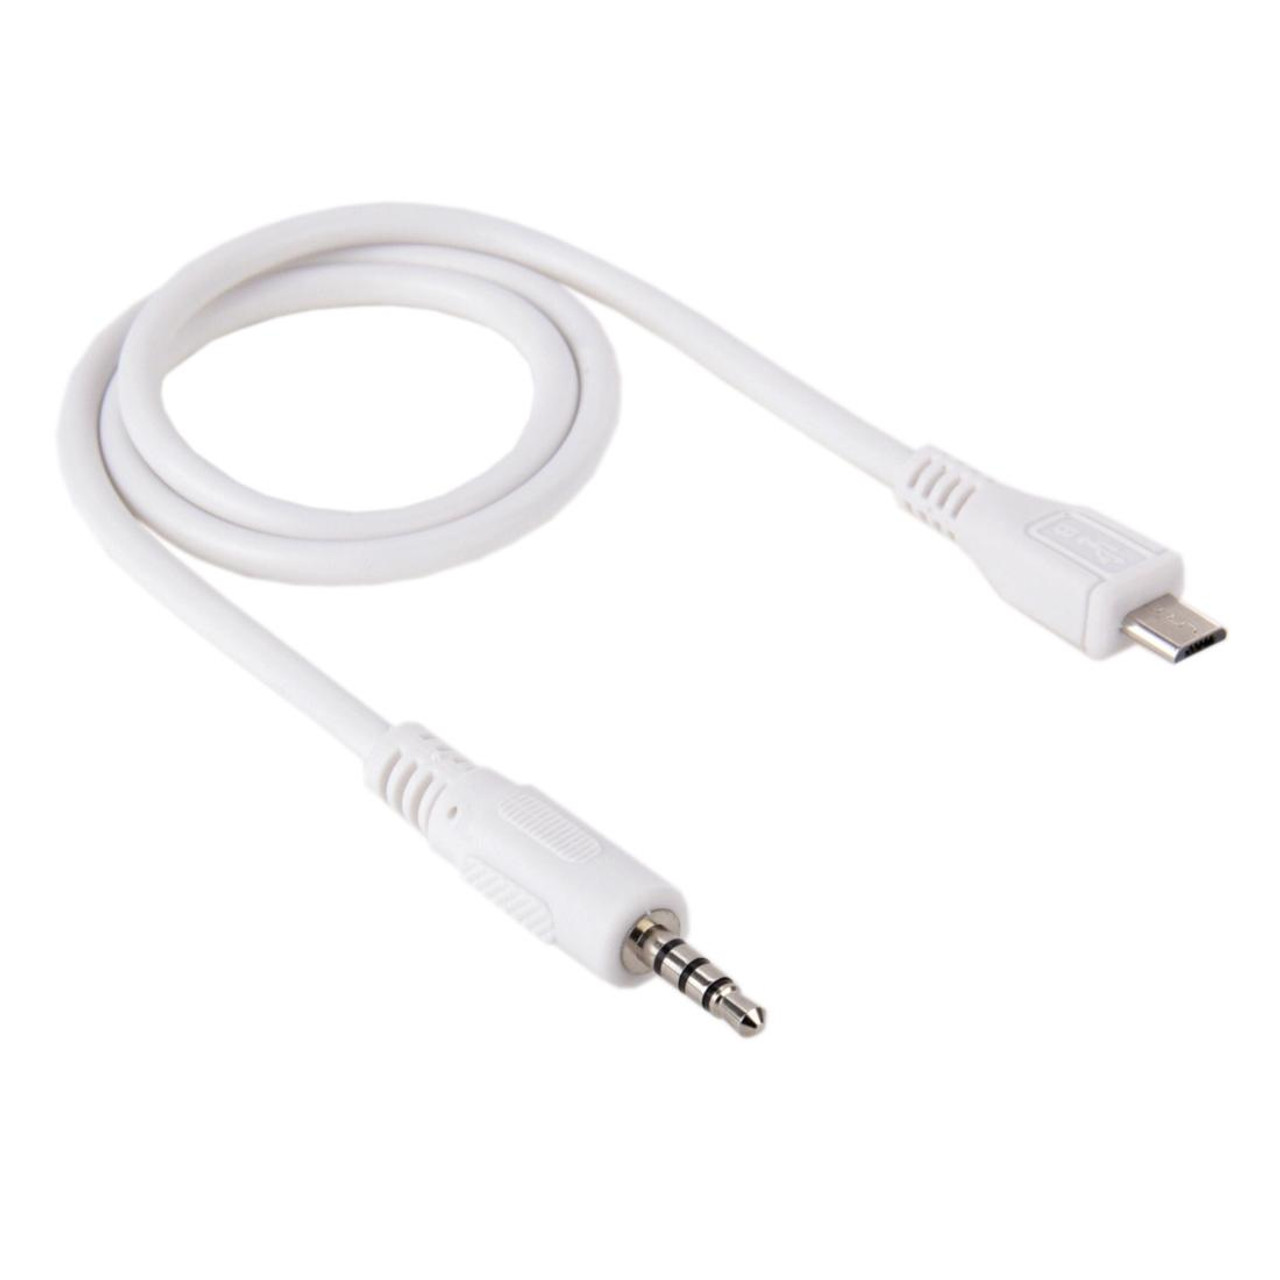 3.5mm Male to Micro USB Male Audio AUX Cable, Length: about 50cm, snatcher